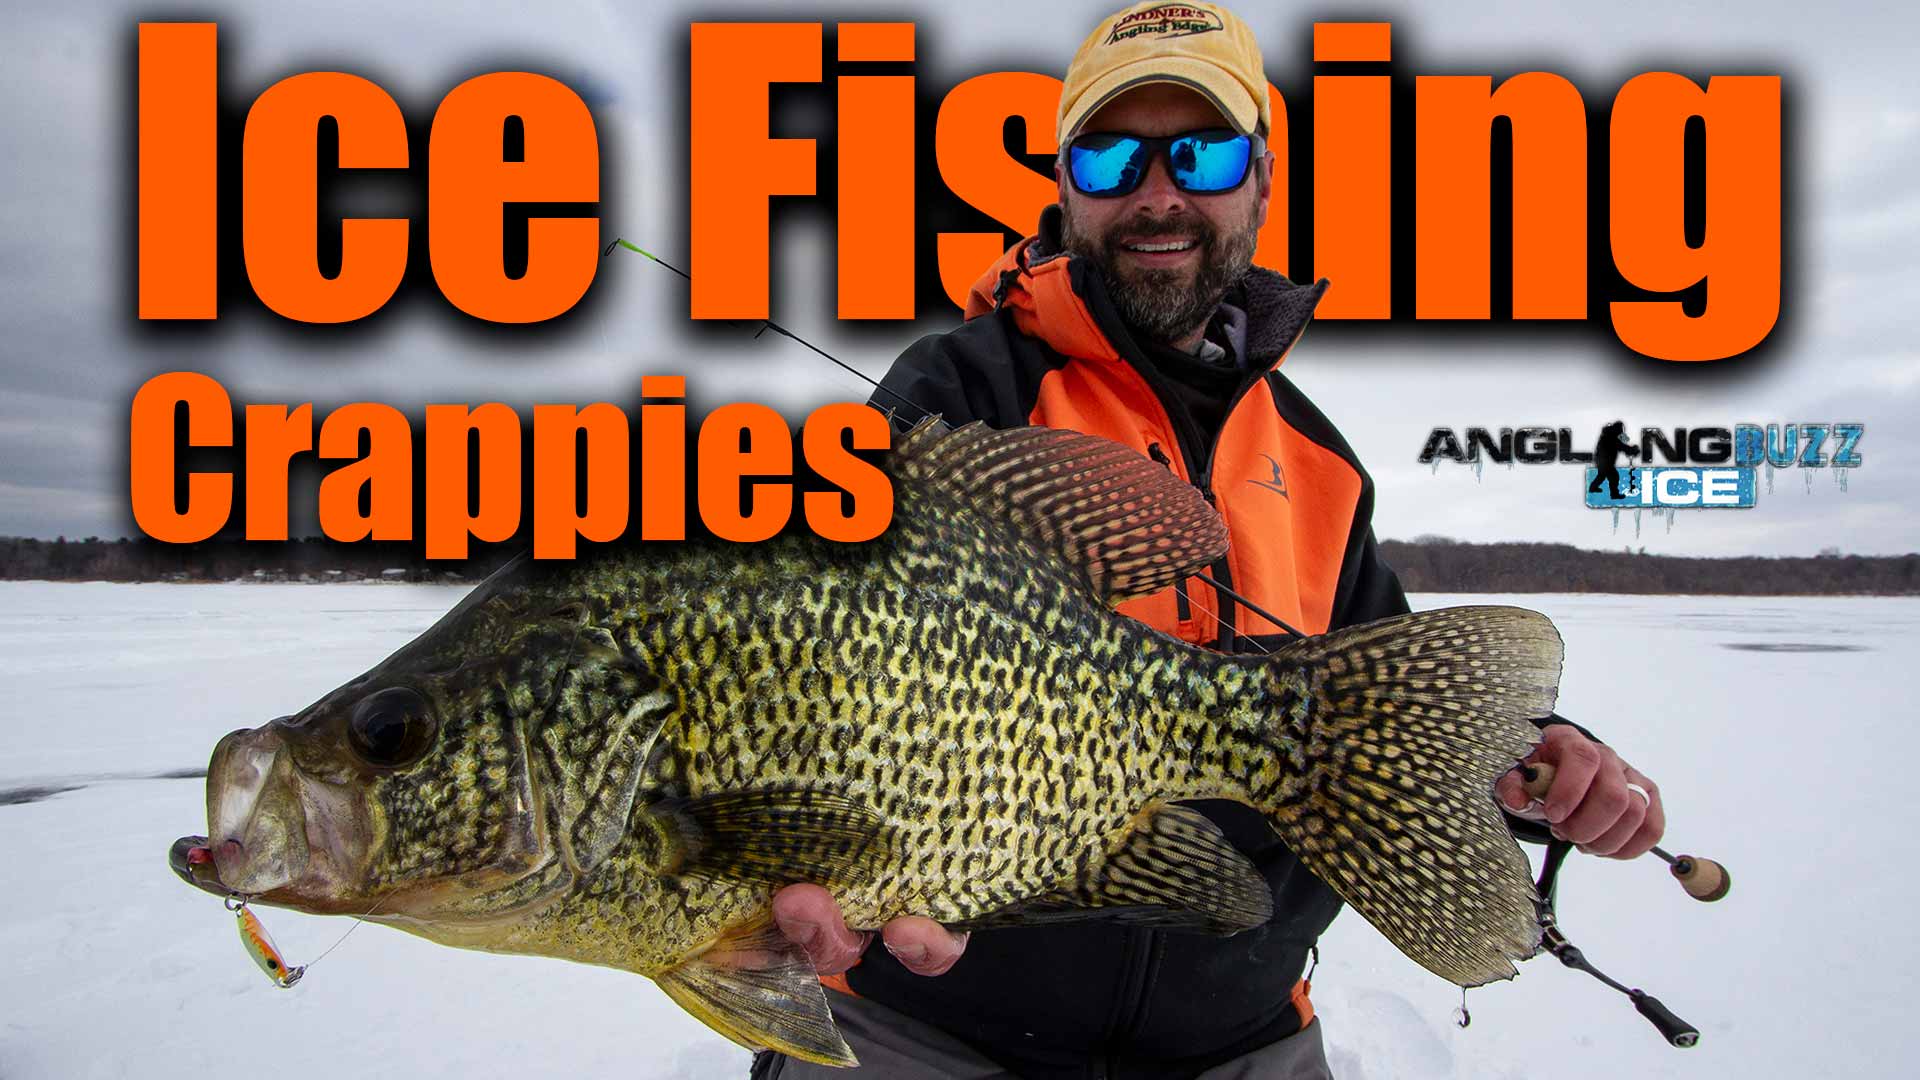 https://anglingbuzz.com/wp-content/uploads/2022/12/SHOW-3-icefishing-crappies.jpg